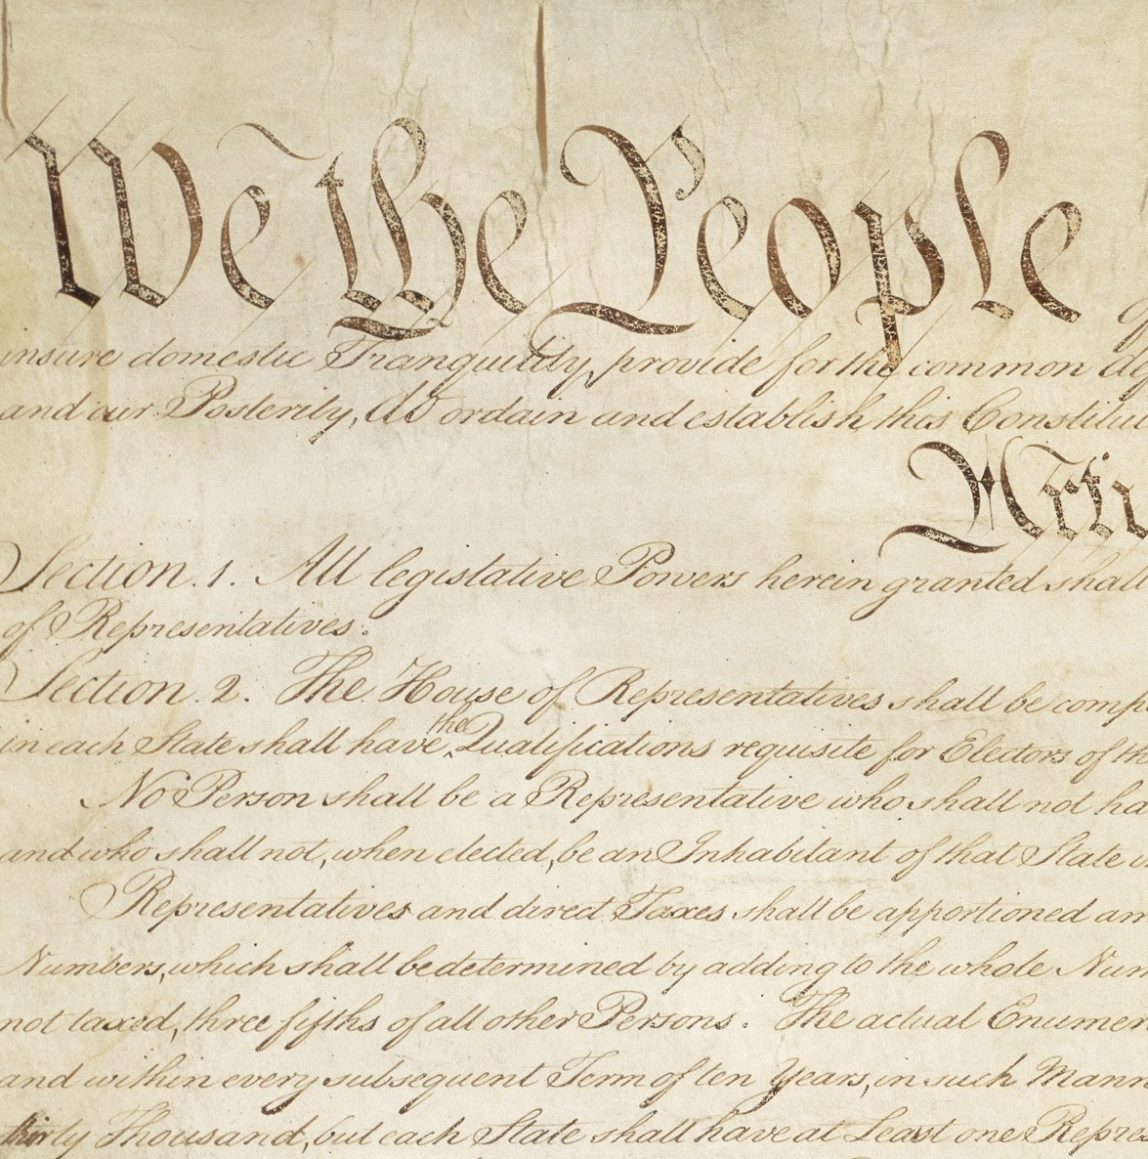 Constitution of the United States. (05/14/1787 - 09/17/1787)